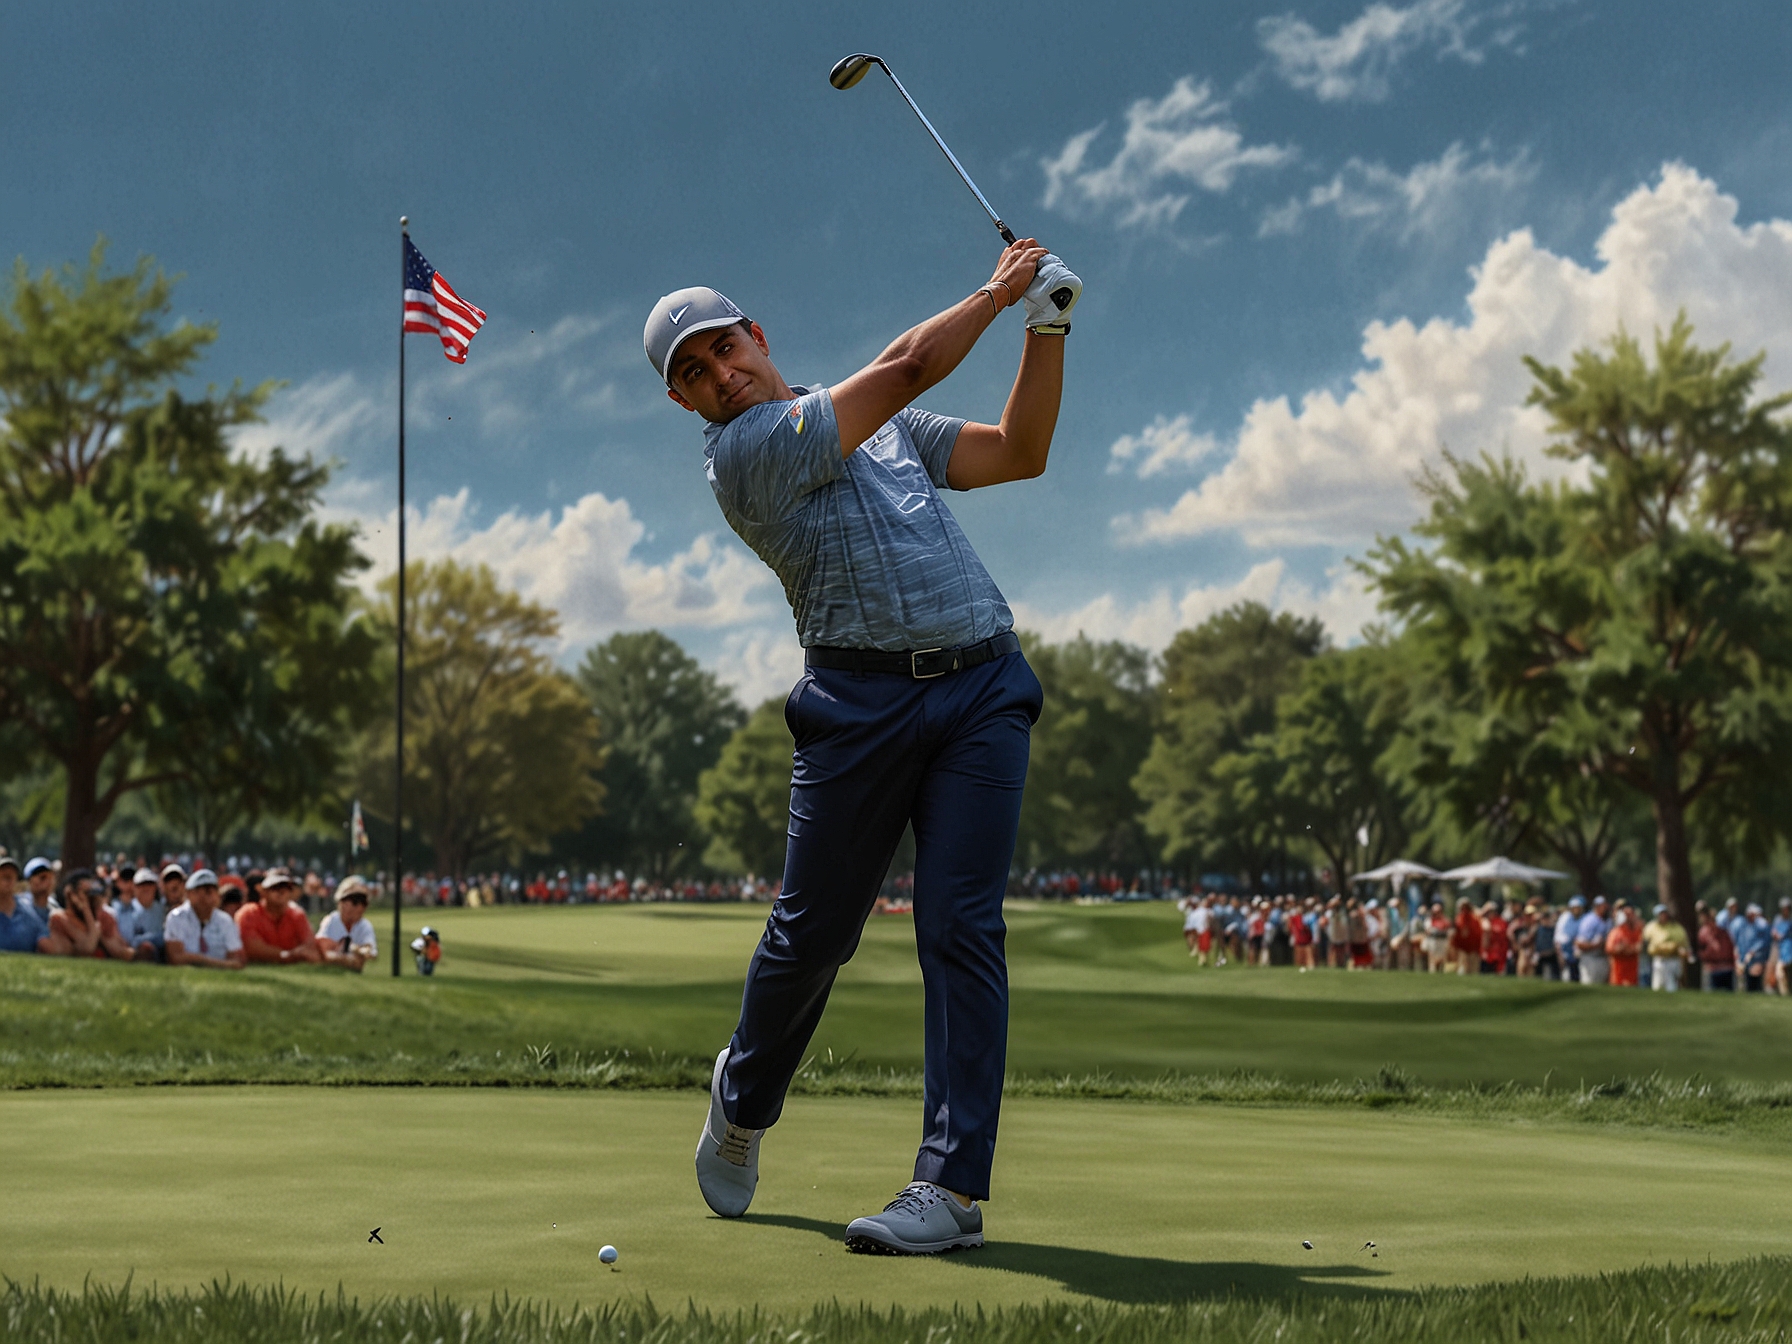 Akshay Bhatia takes a swing at the Rocket Mortgage Classic, his focus and precision evident in every move. The Detroit Golf Club's challenging course serves as the backdrop.